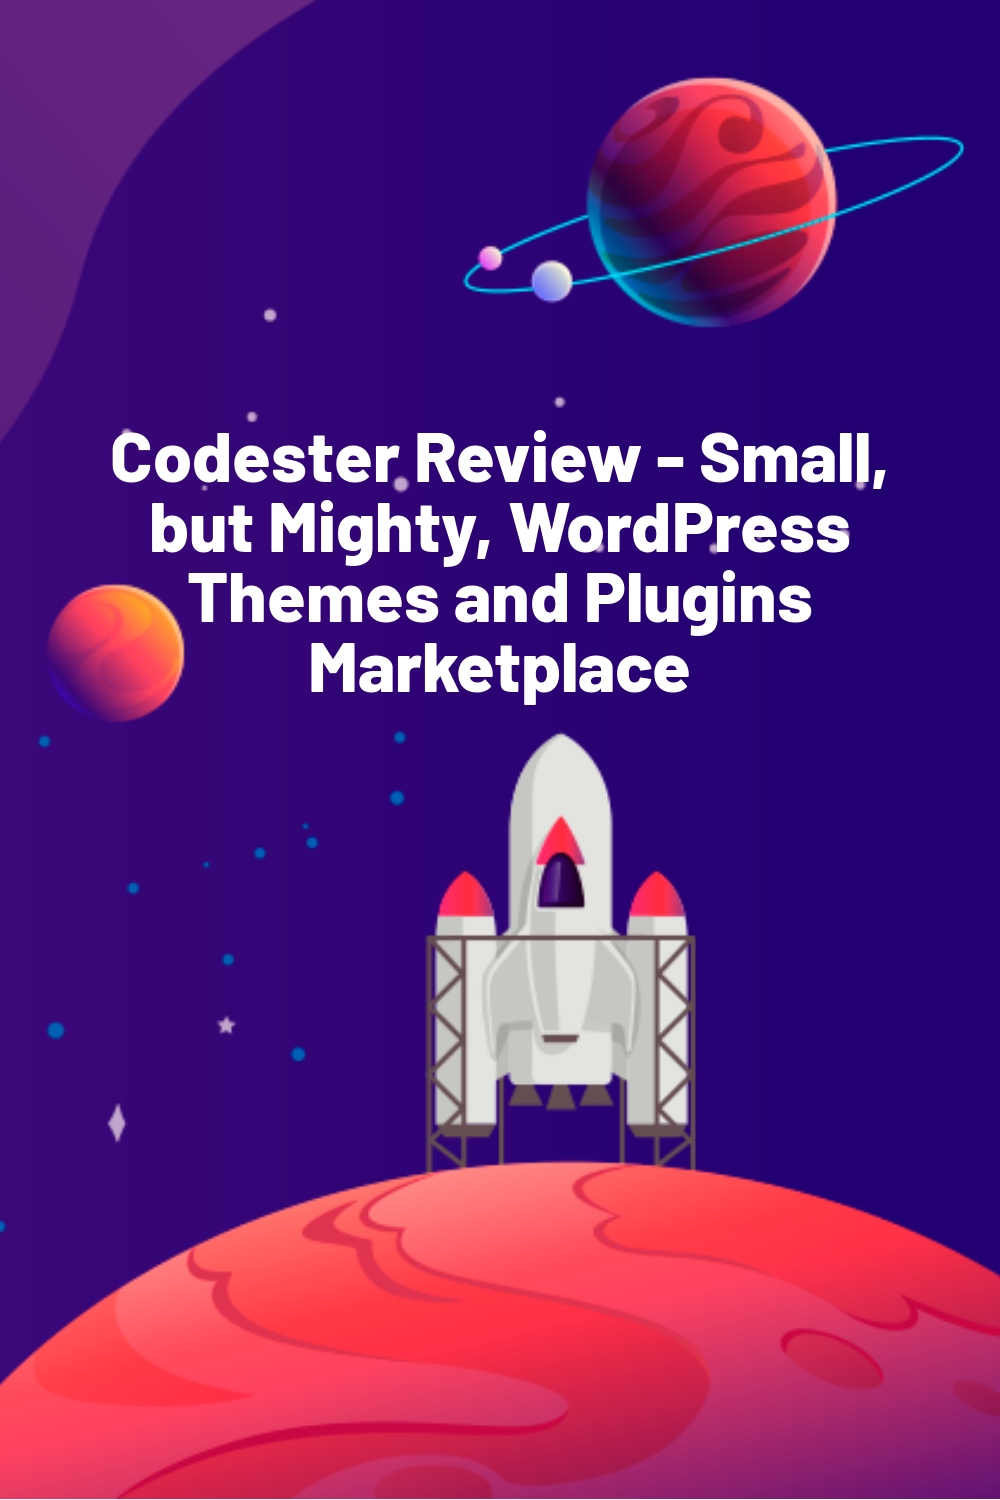 Codester Review – Small, but Mighty, WordPress Themes and Plugins Marketplace